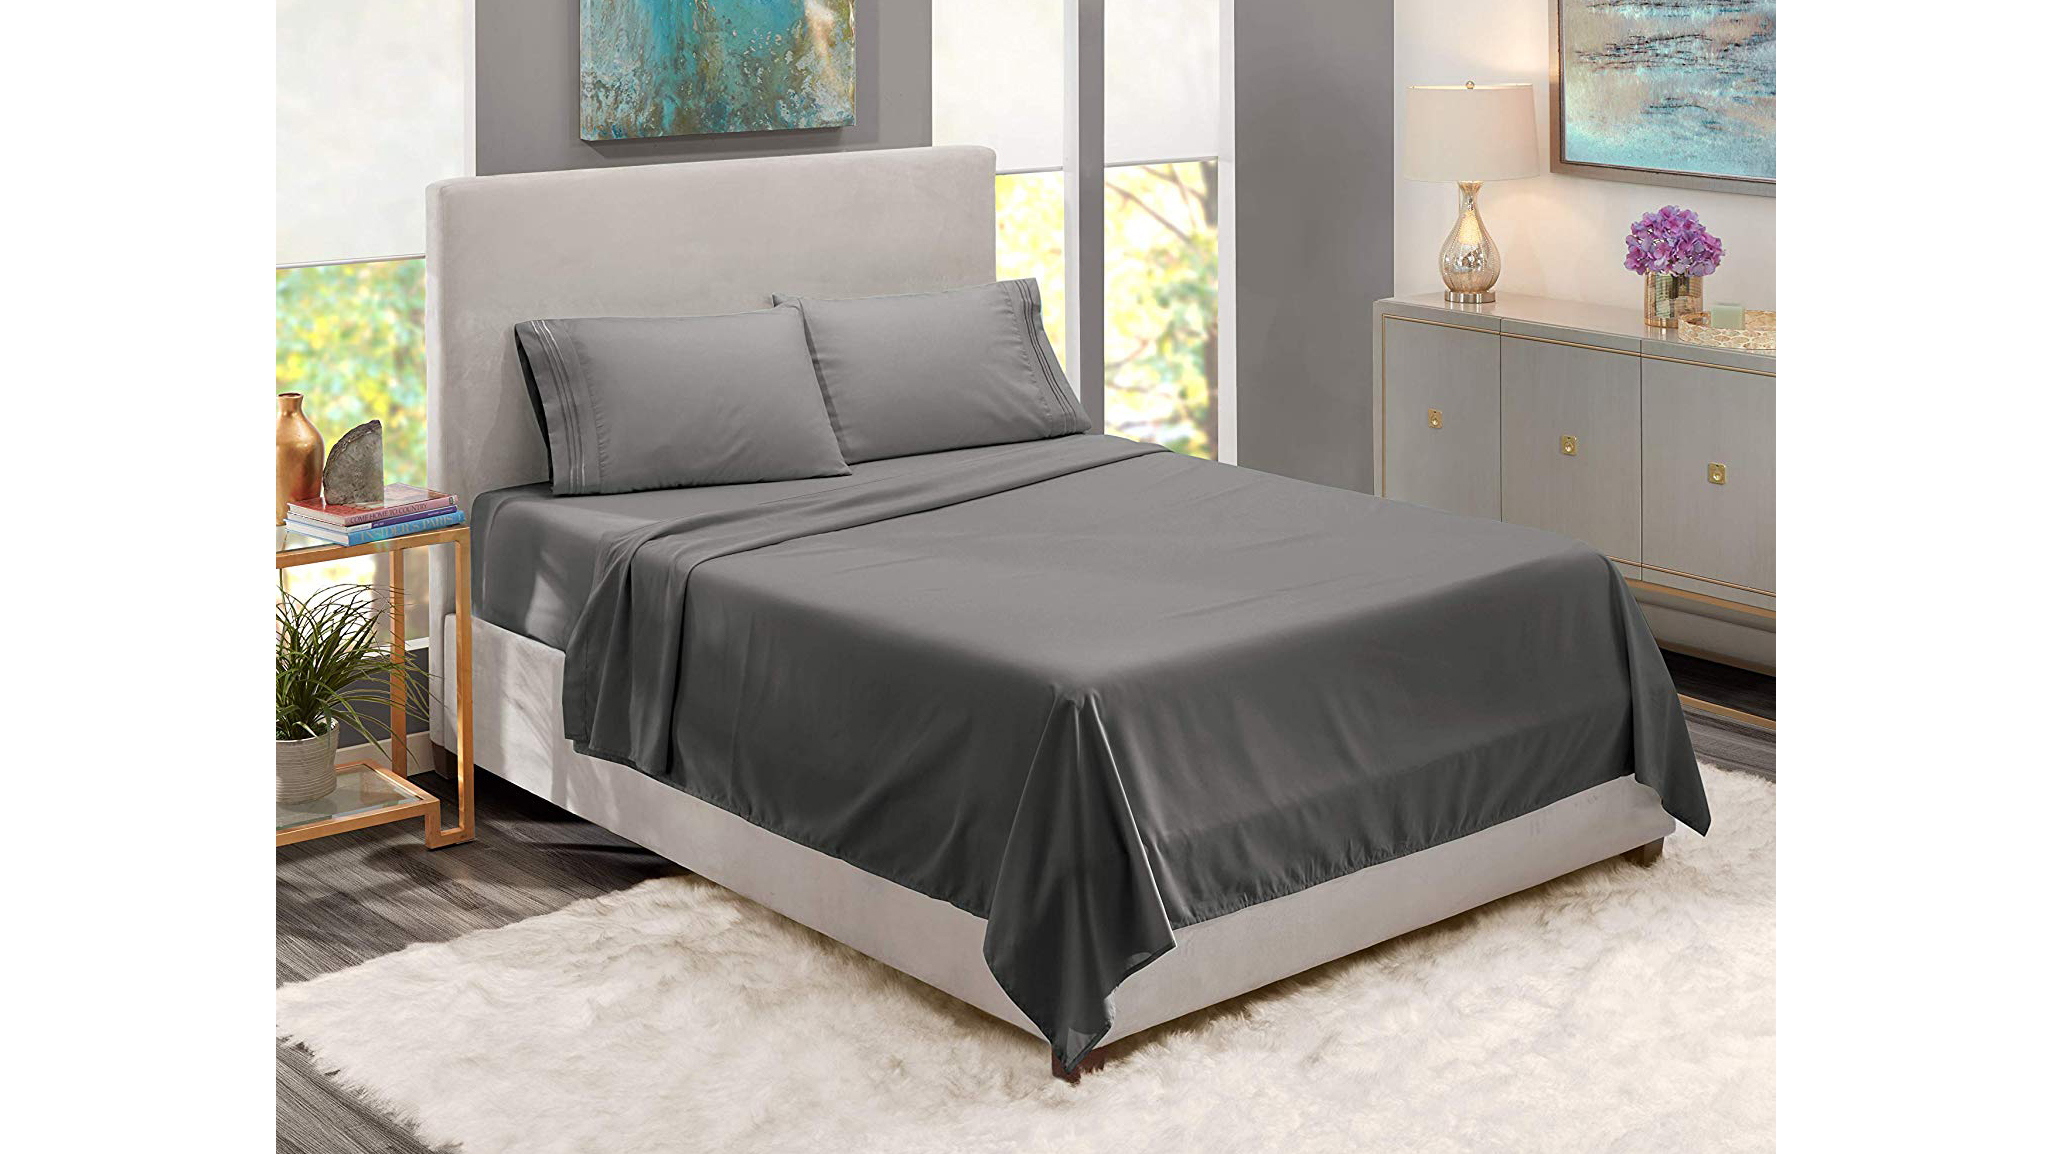 Giza Egyptian Cotton Bed Sheet Set Grey Queen//King All Size Sheets Deep 10/"-30/"